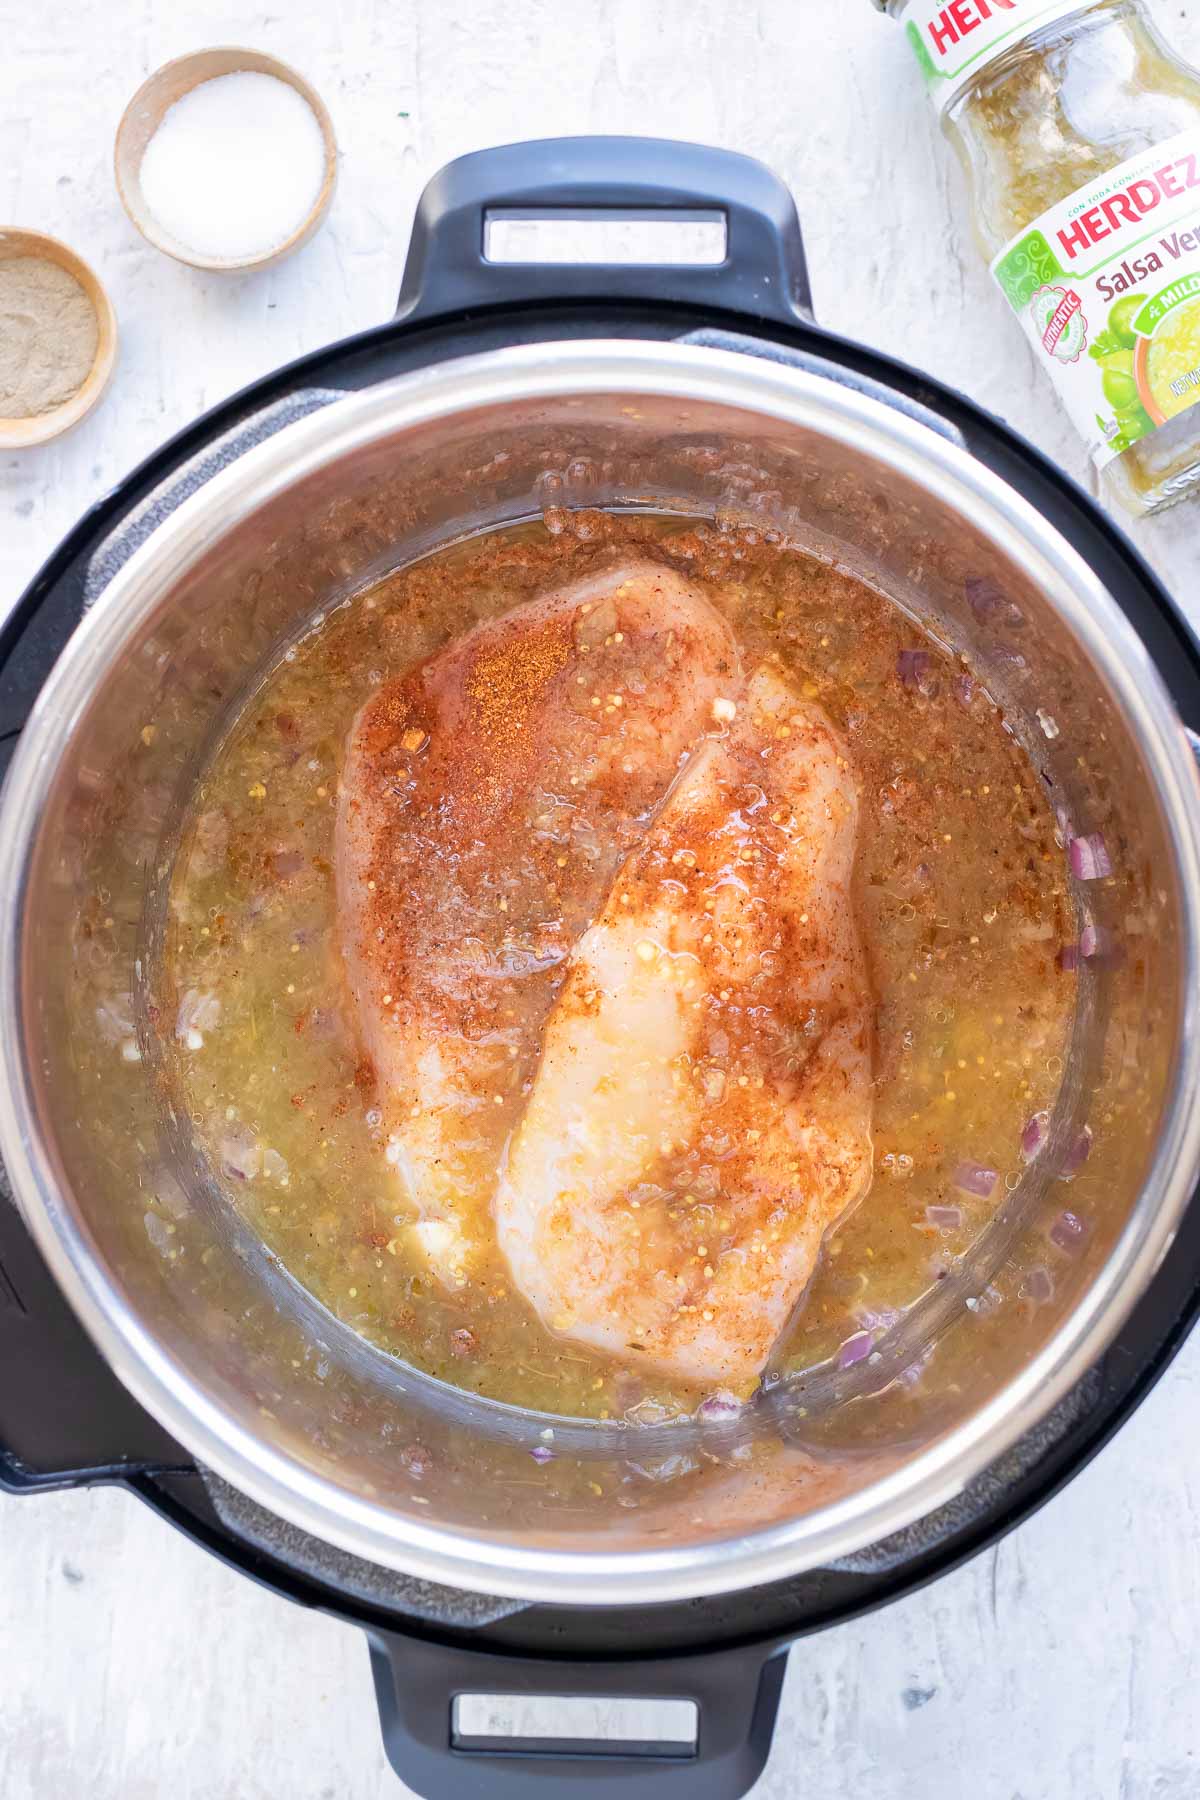 Chicken is cooked in an Instant Pot.